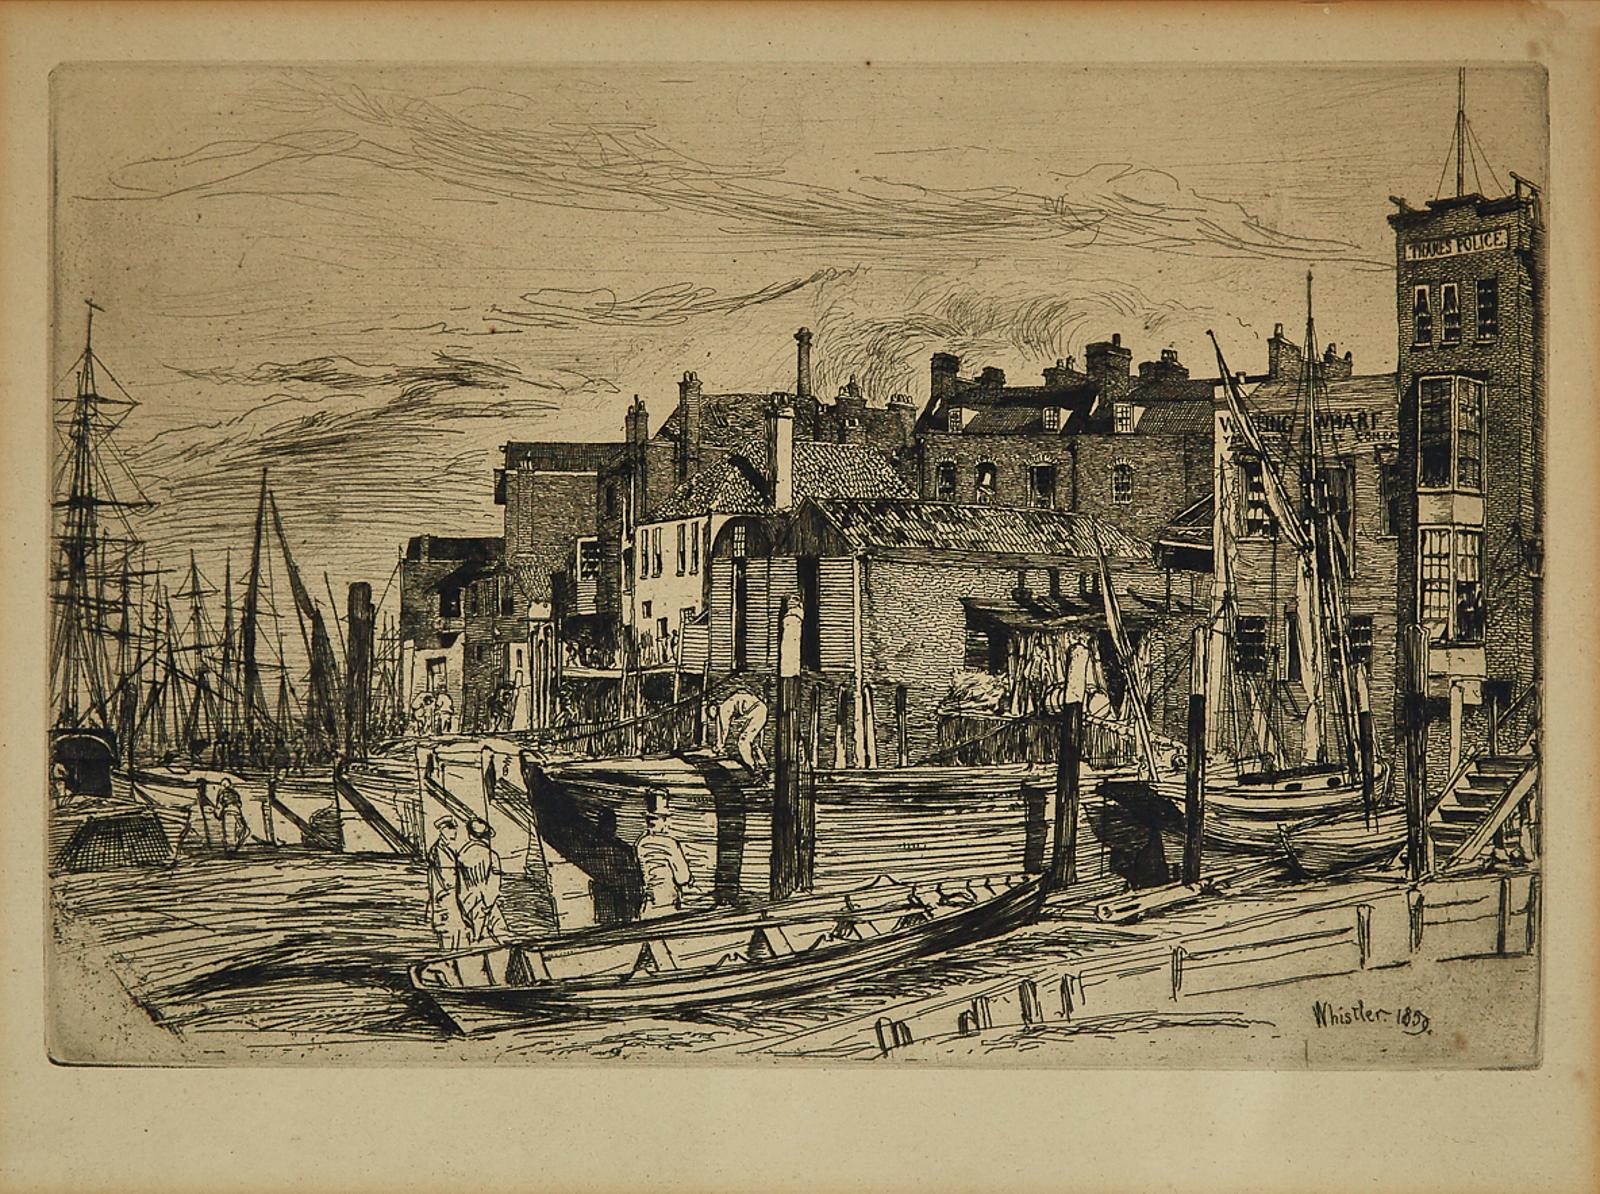 James Abbott McNeill Whistler (1834-1903) - Thames Police (Wapping Wharf) (From A Series Of Sixteen Etchings Of Scenes On The Thames And Other Subjects), 1859 [kennedy, 44; Glasgow, 53]